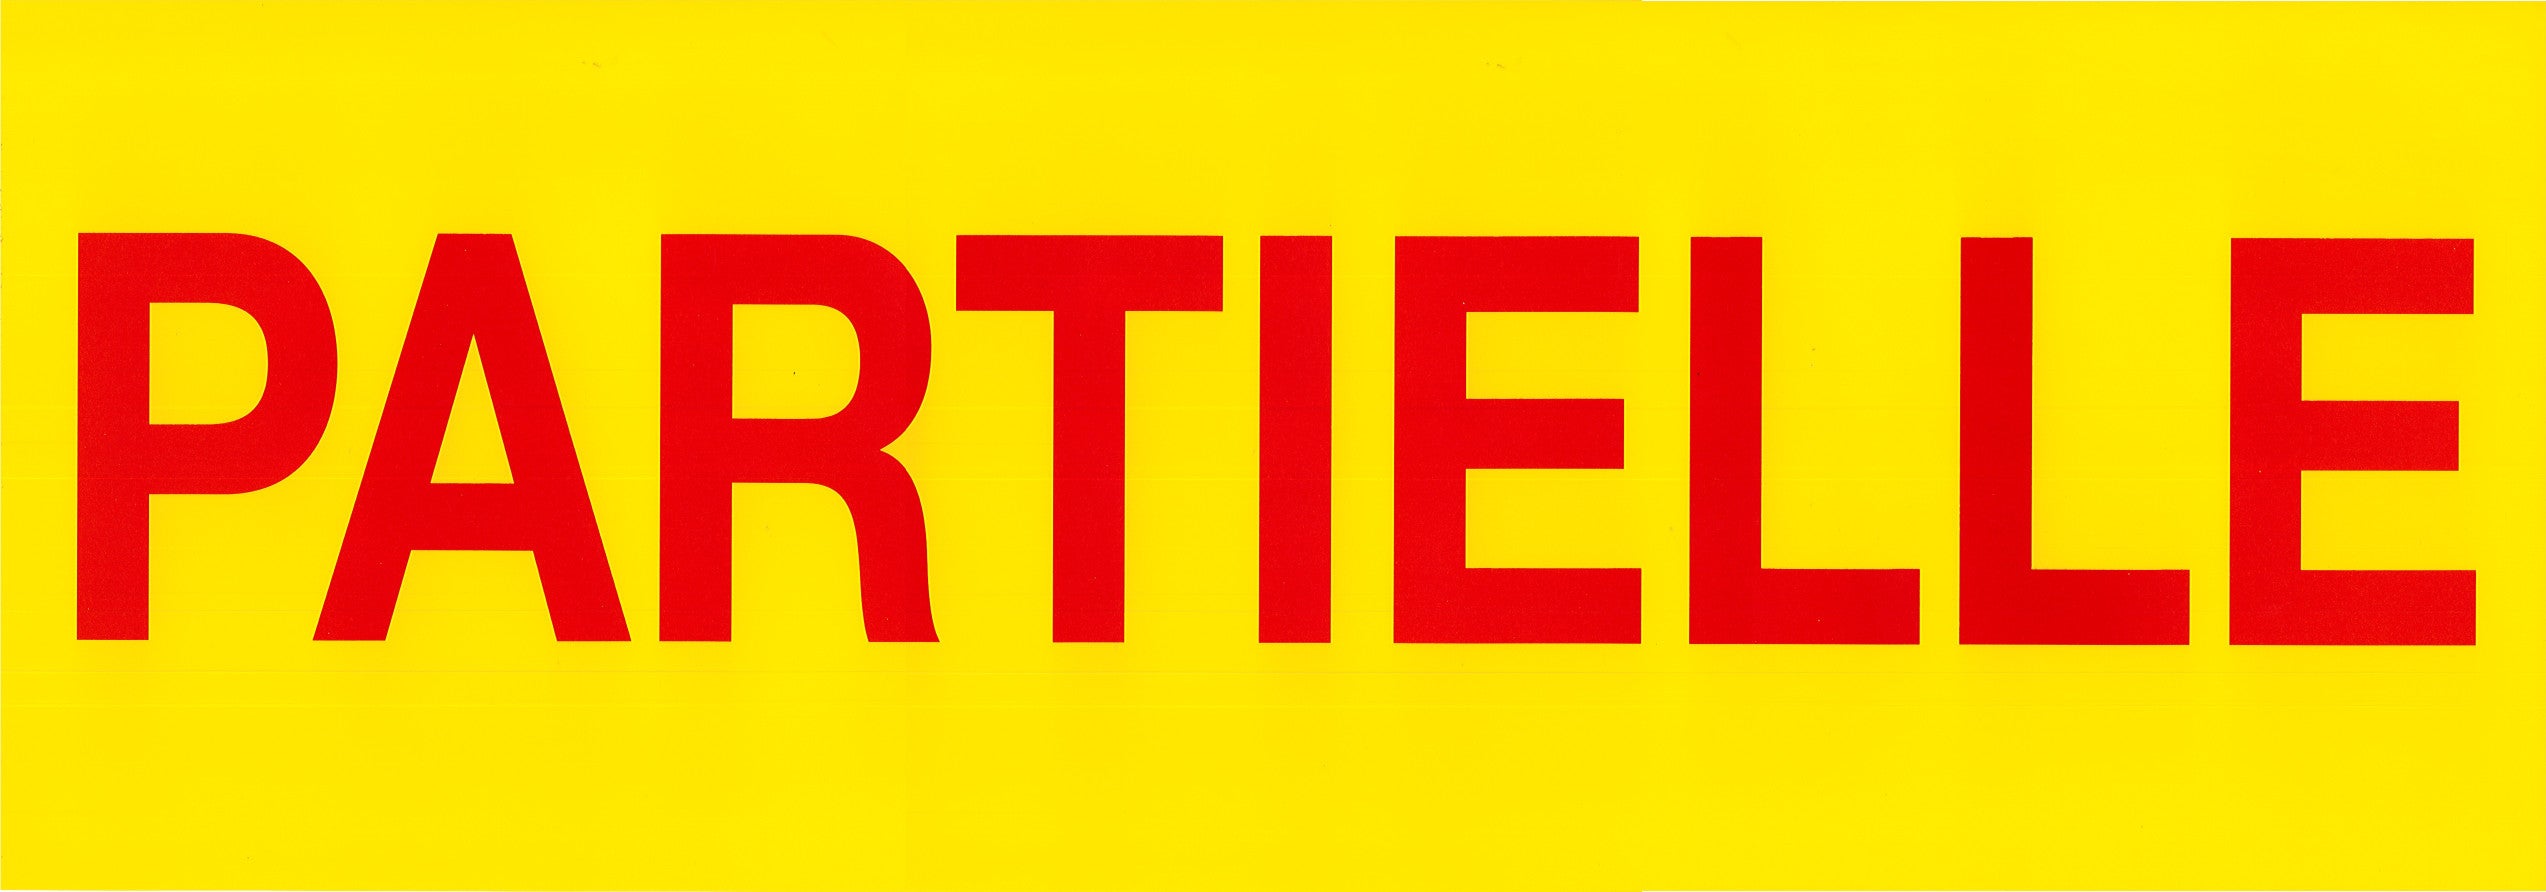 DittaDisplay Affiches combinée 23x65cm partielle rouge jaune Kombinierte teilweise rot gelb Poster Combined posters partial red yellow